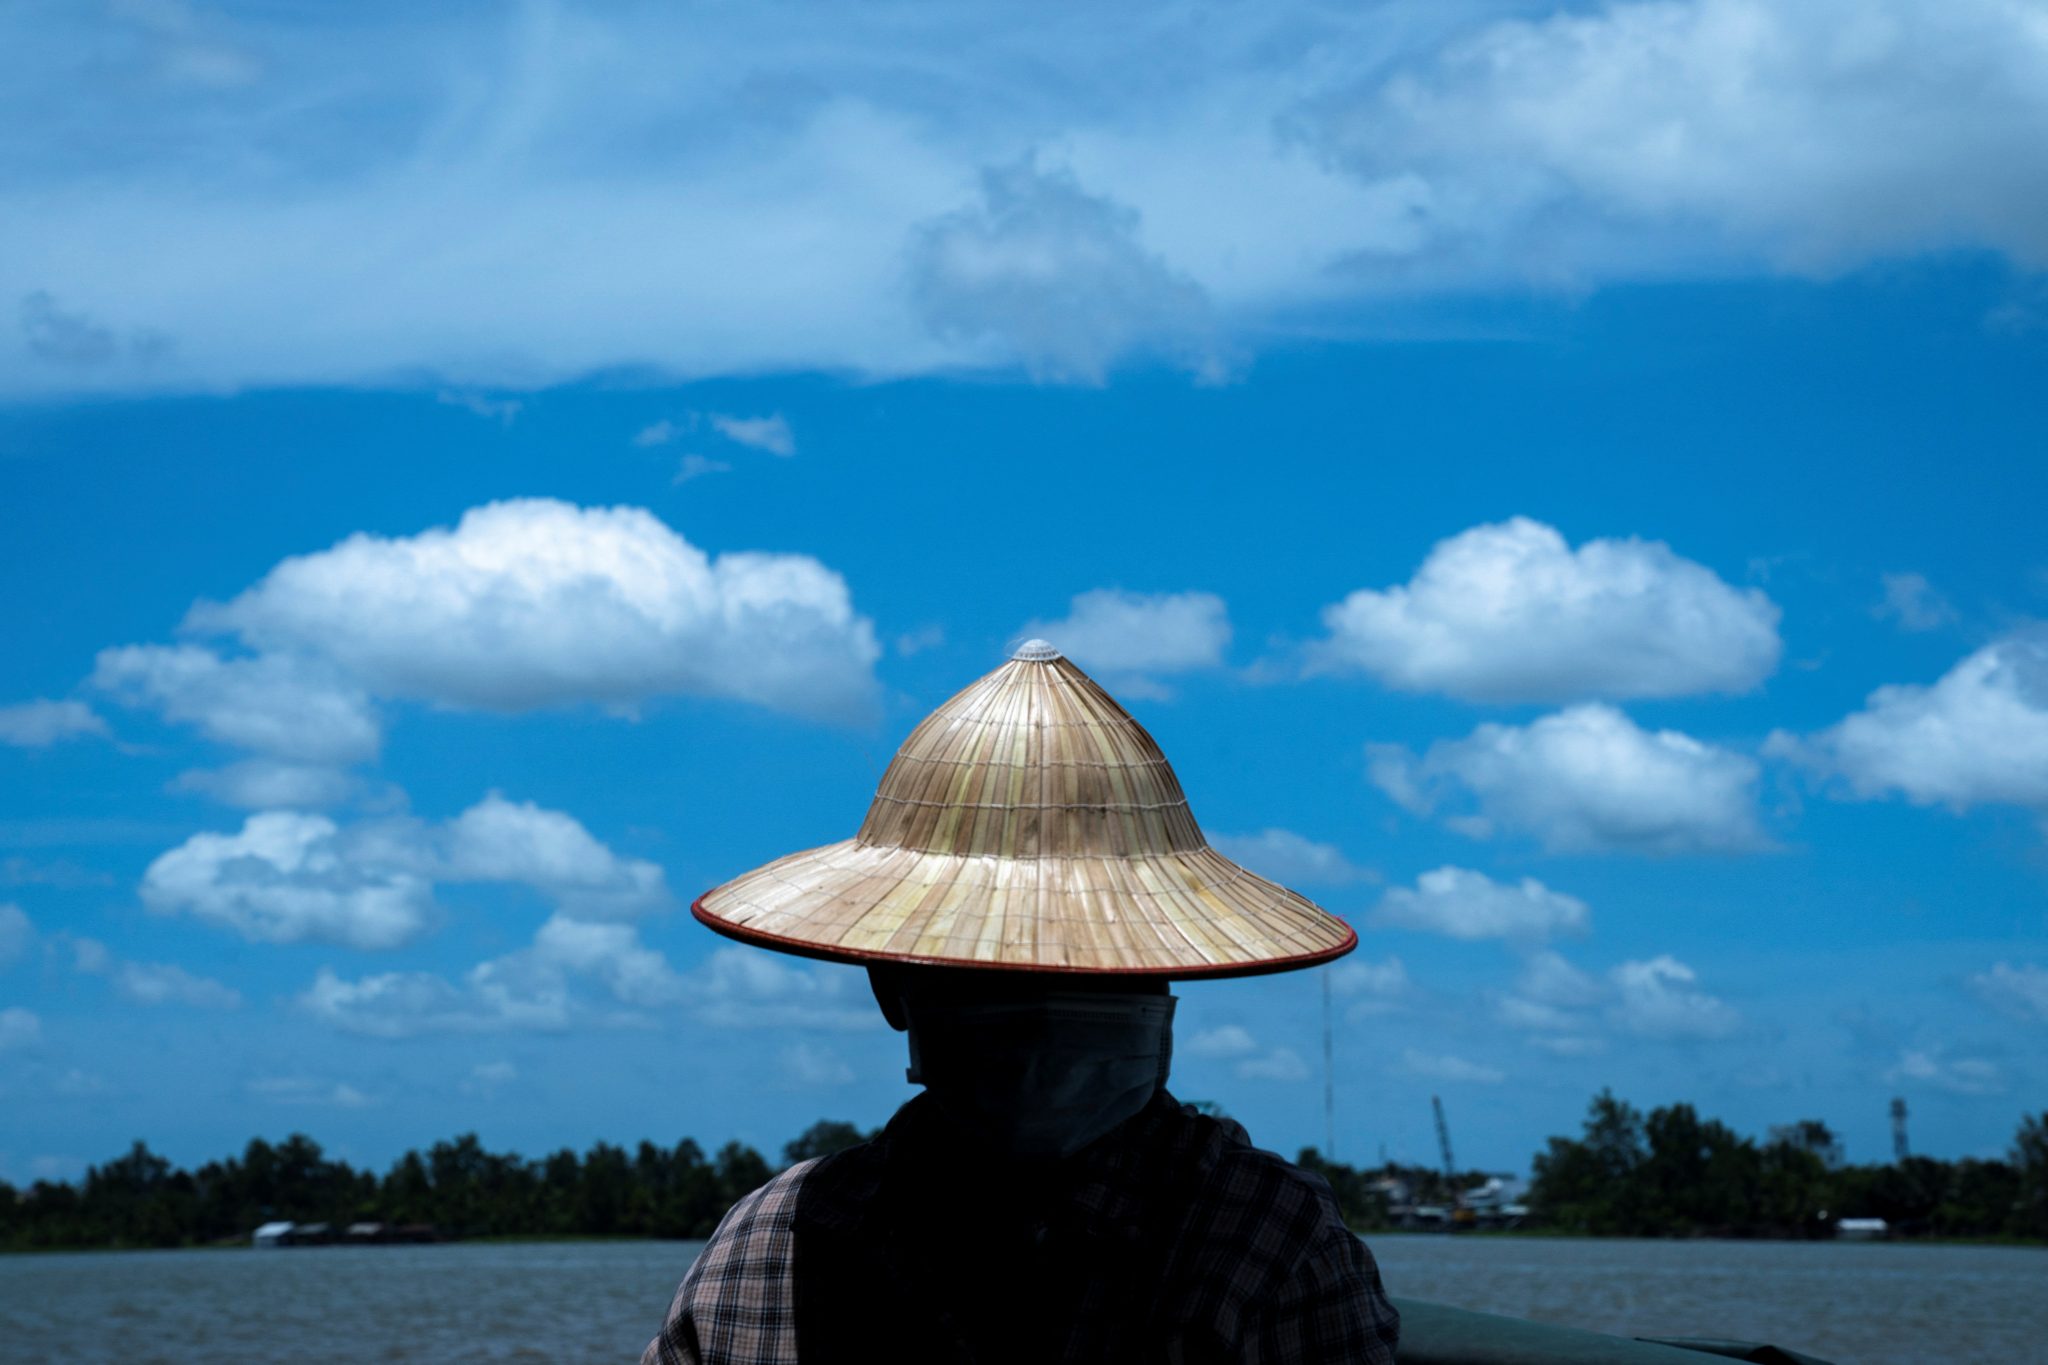 A boat driver rides along the Mekong river located in the Mekong river which was affected by sediment in Mekong's regional capital Can Tho, Vietnam, 25 May 2022 (Photo: REUTERS/Athit Perawongmetha)